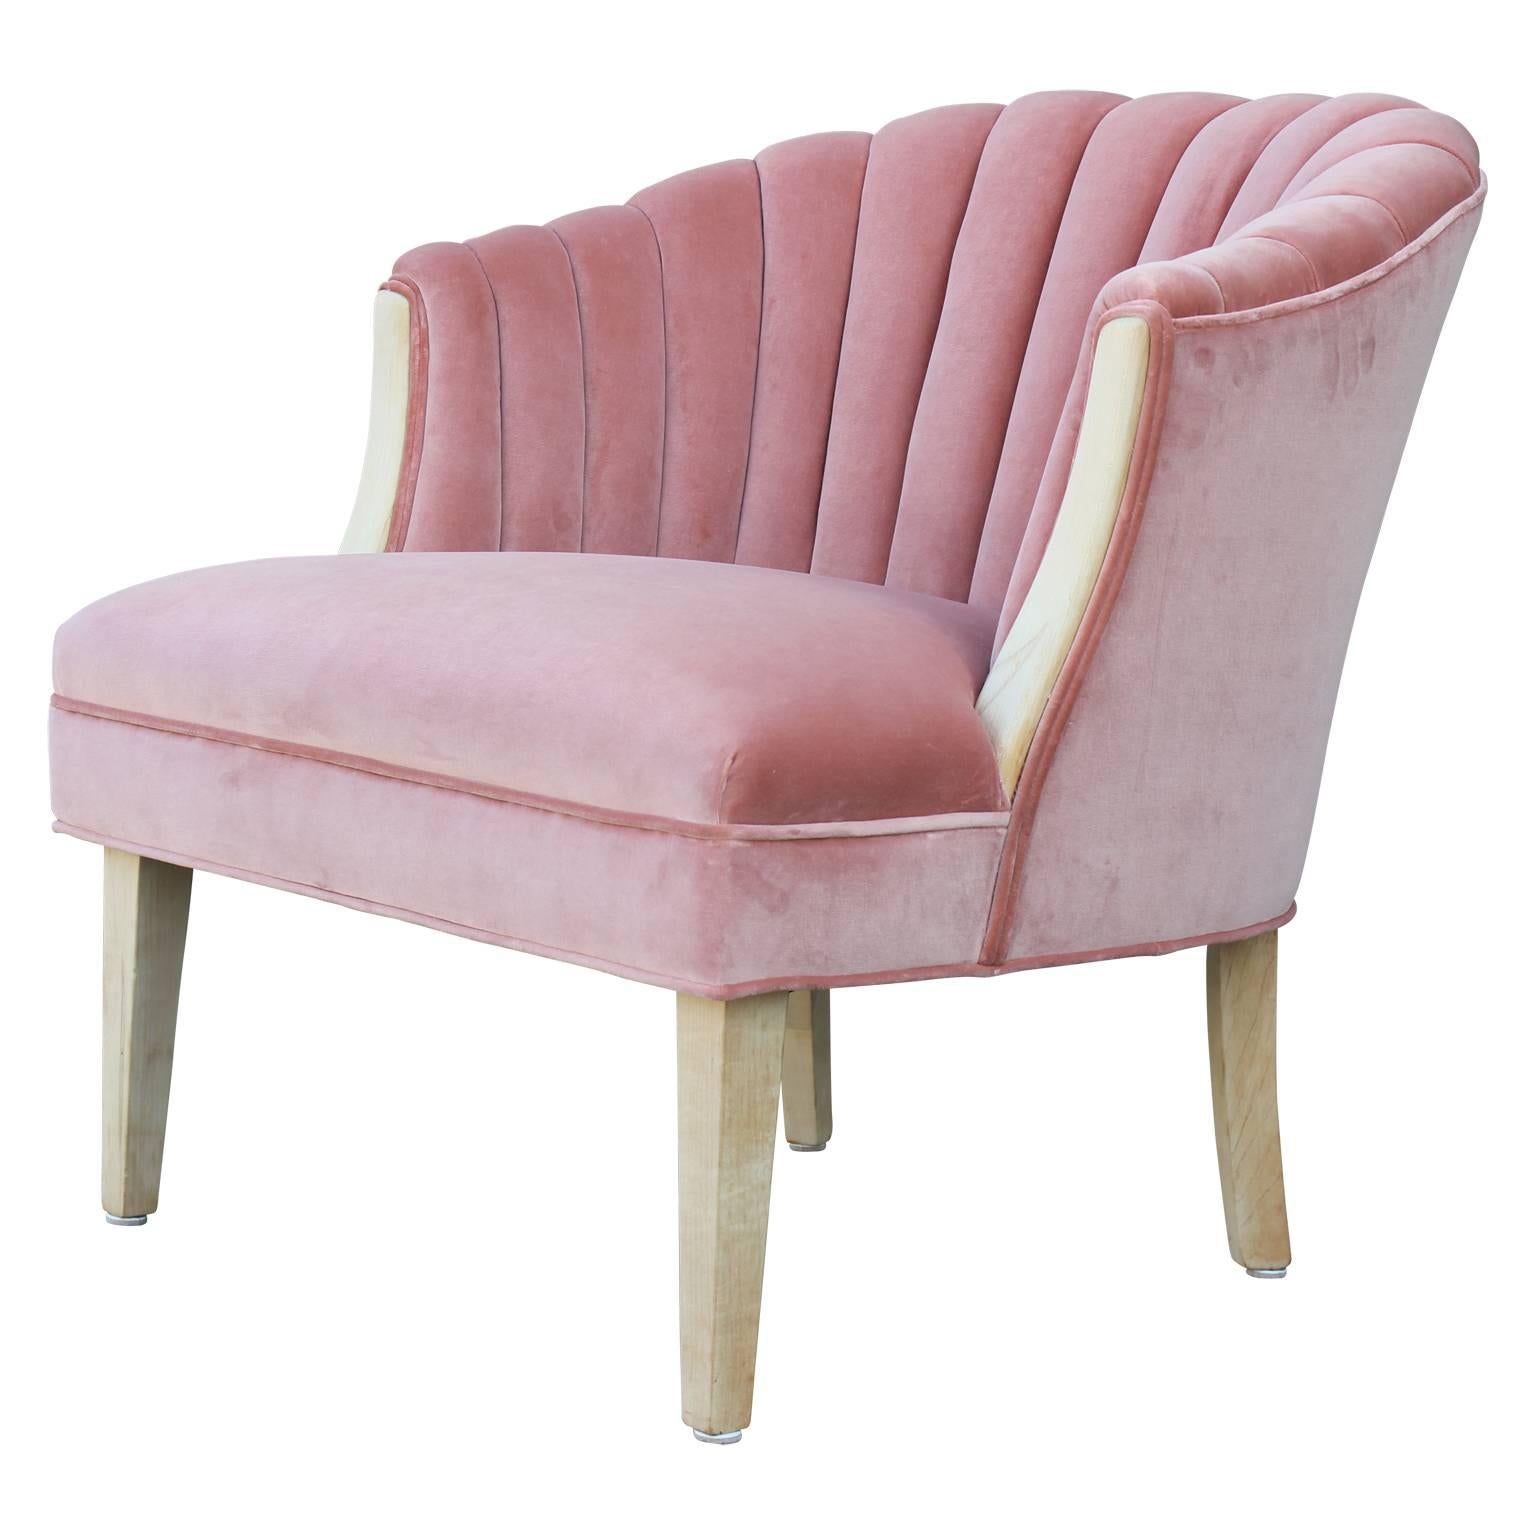 Gorgeous channel back lounge chair recently bleached and freshly upholstered in a soft pink velvet. Perfect addition to any room.